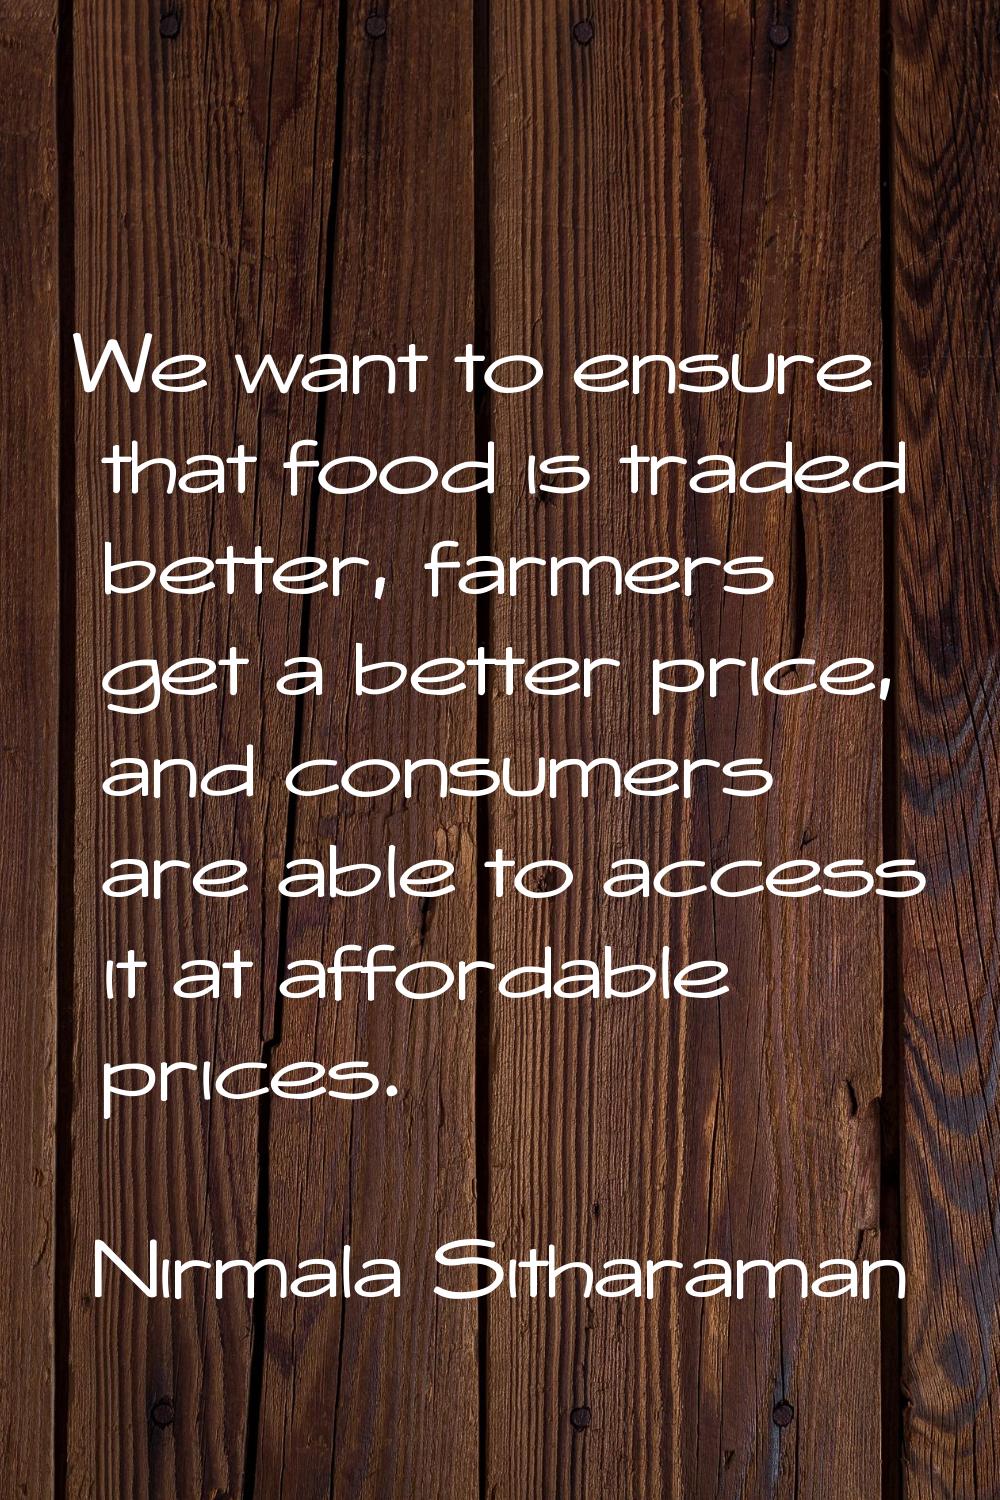 We want to ensure that food is traded better, farmers get a better price, and consumers are able to